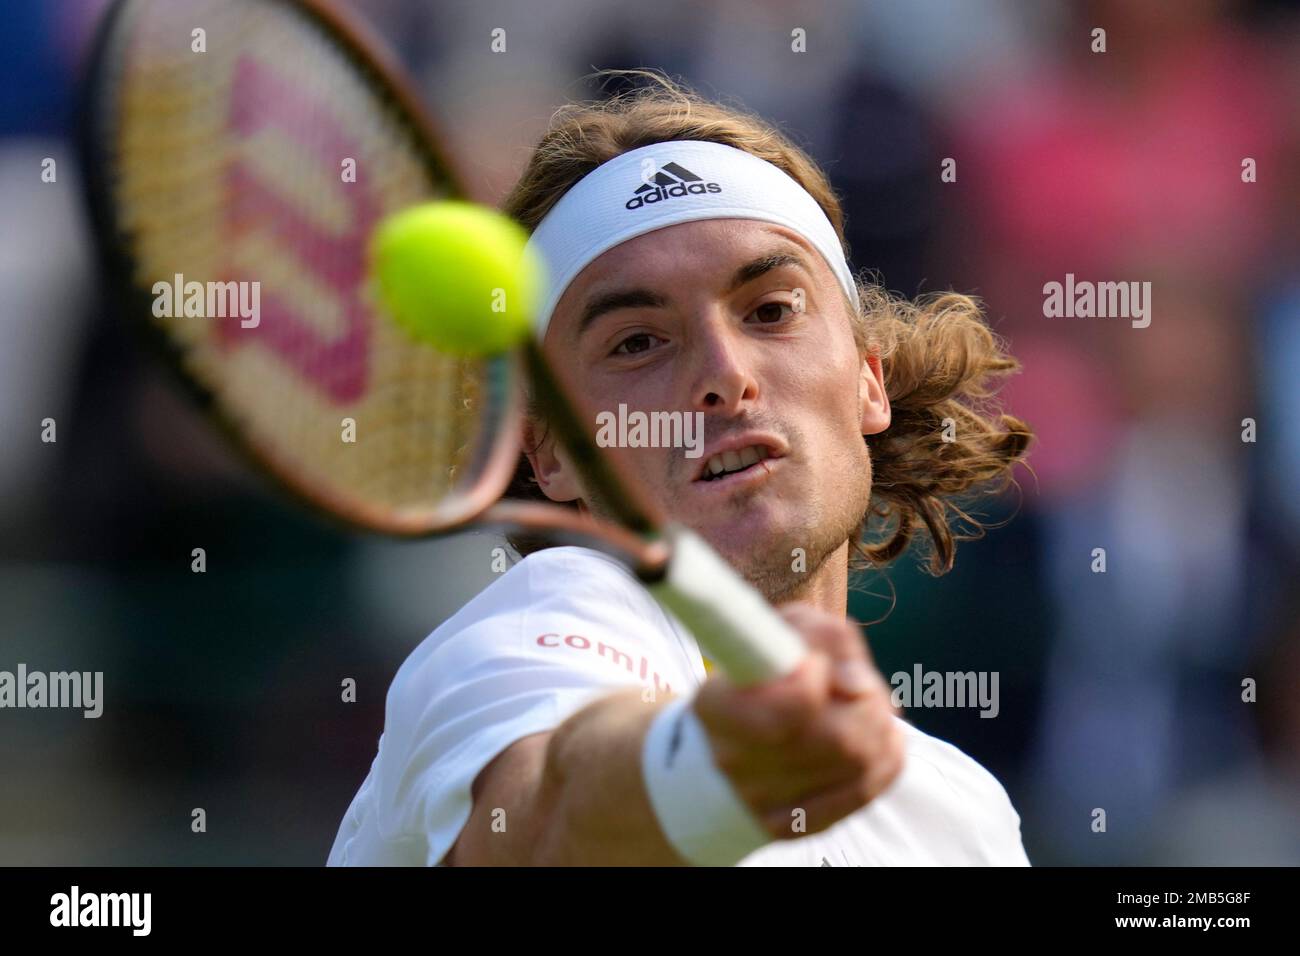 Greeces Stefanos Tsitsipas returns the ball to Australias Nick Kyrgios during a third round mens singles match on day six of the Wimbledon tennis championships in London, Saturday, July 2, 2022